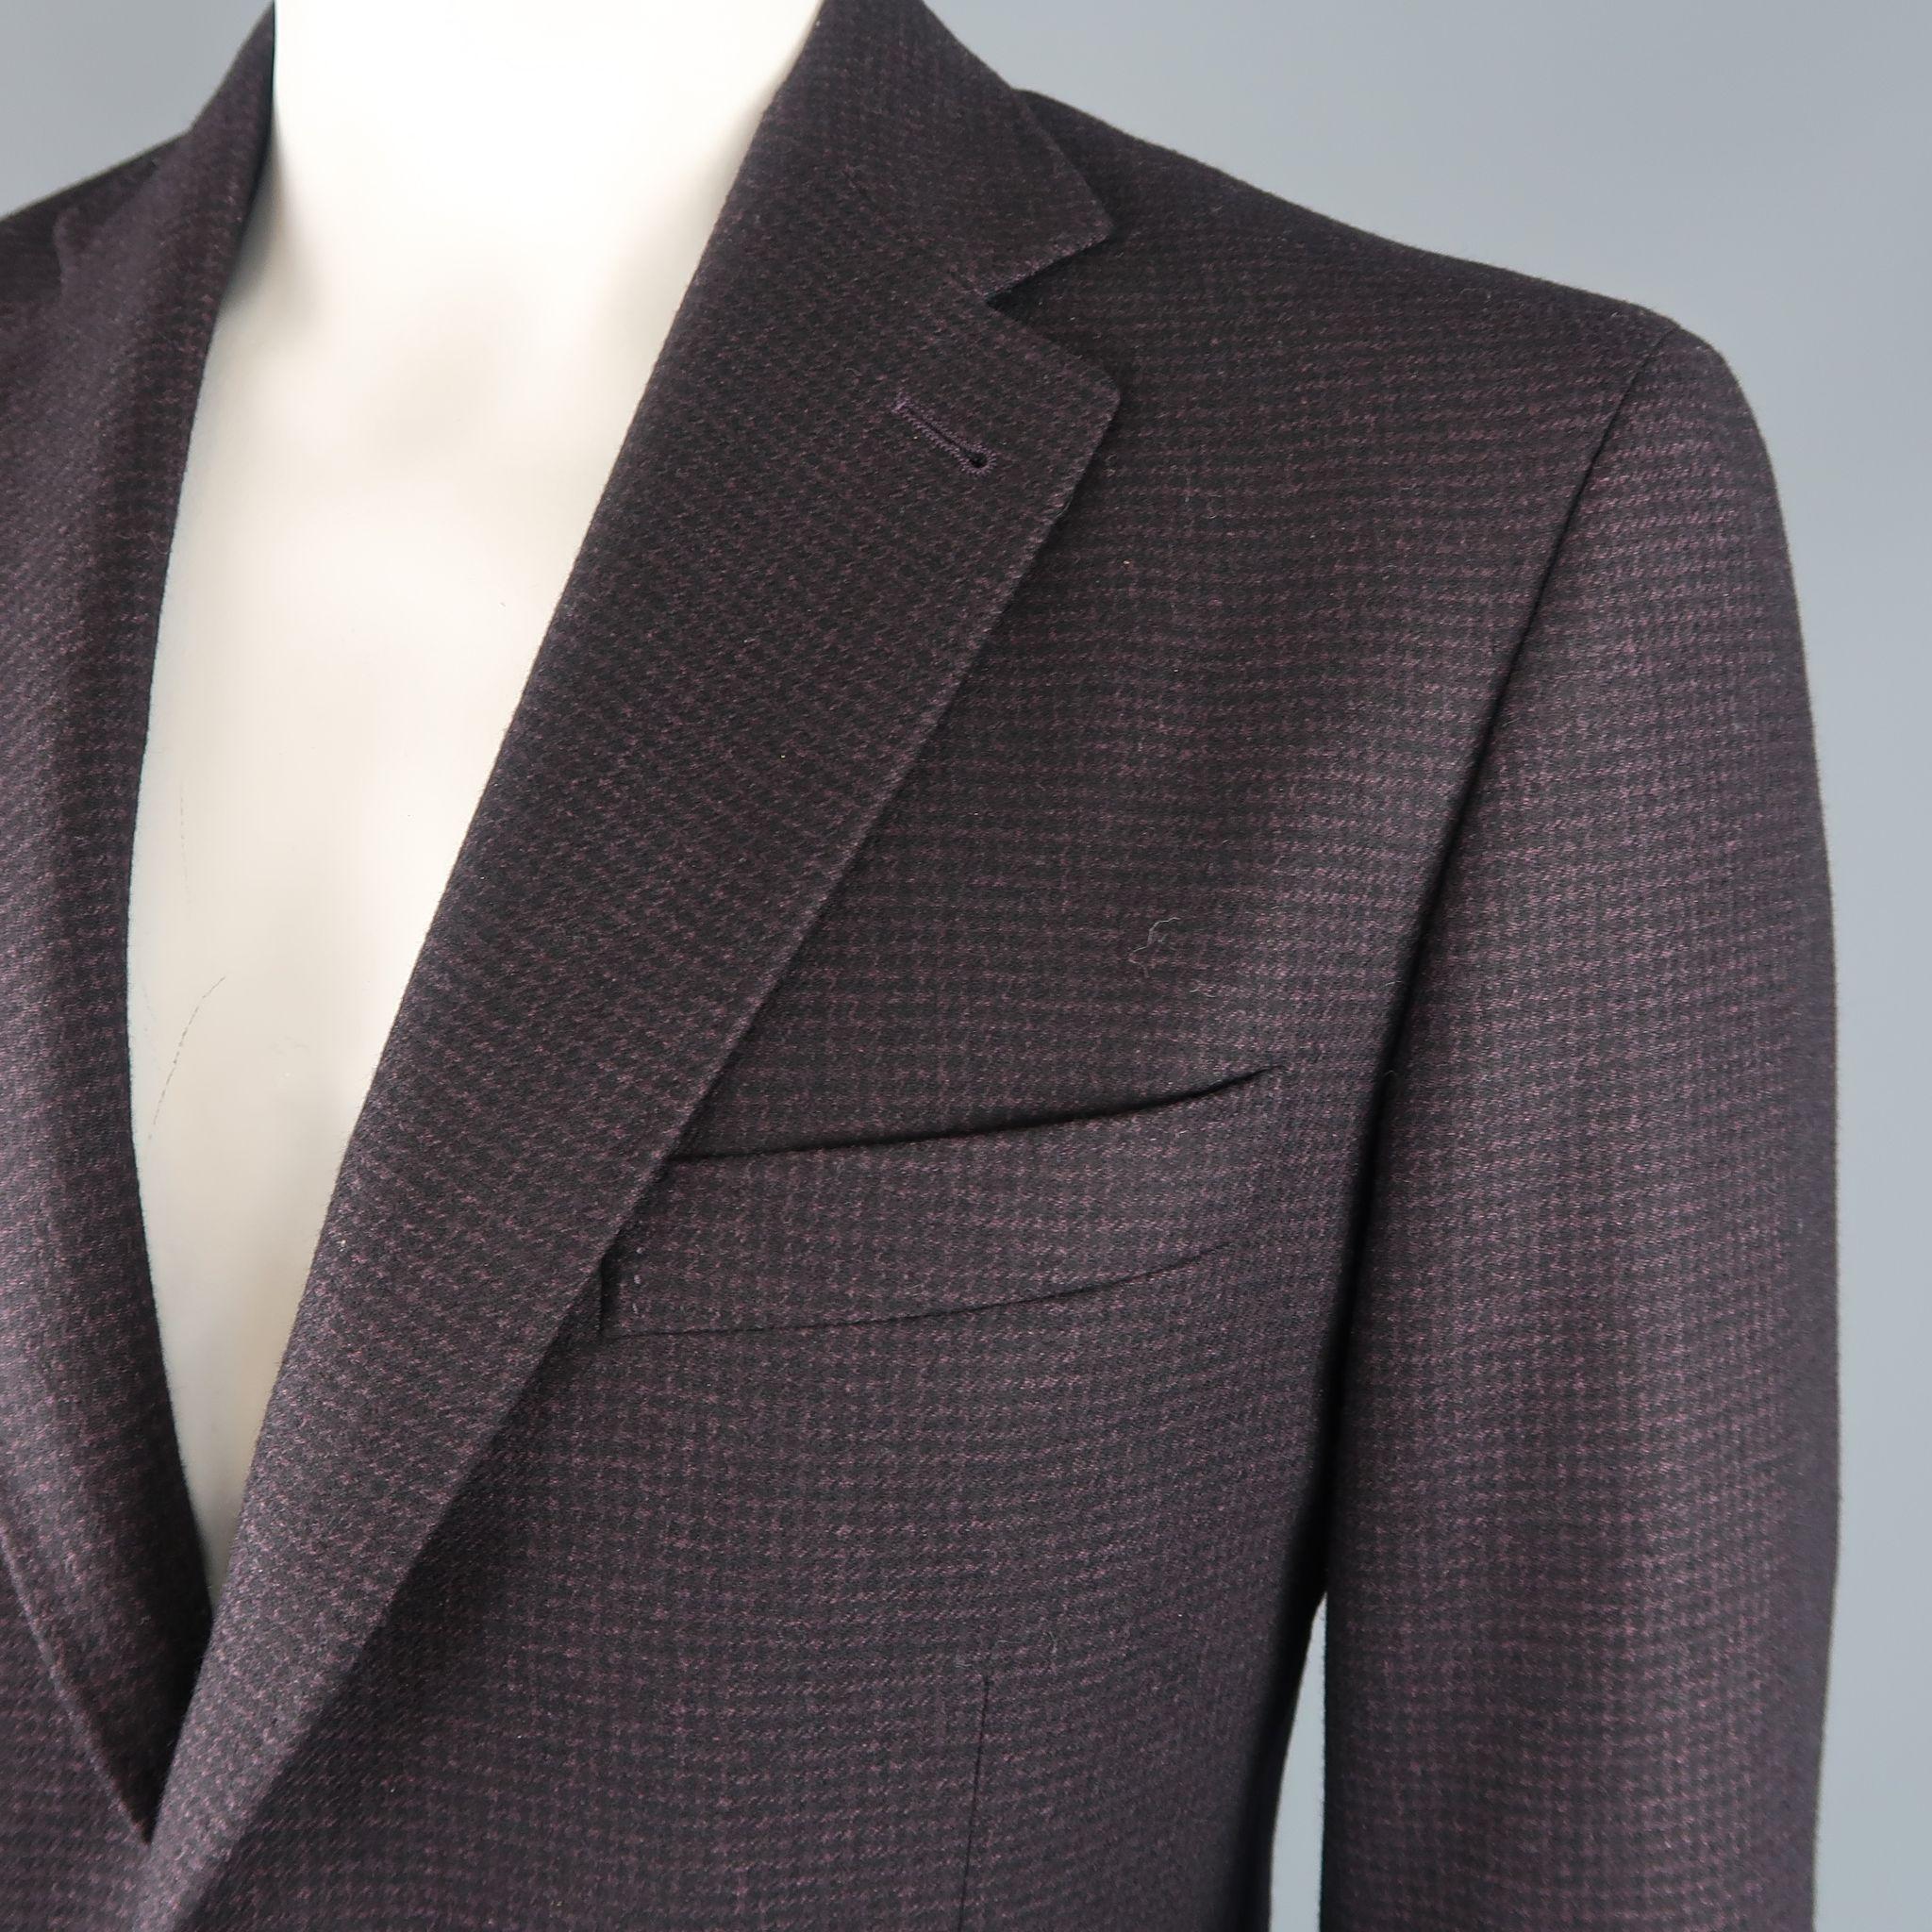 Single breasted CANALI sport coat comes in black and eggplant purple houndstooth print wool cashmere silk blend fabric with a wide notch lapel, two button front, and patch pockets. Made in Italy.

Excellent Pre-Owned Condition.
Marked: 52